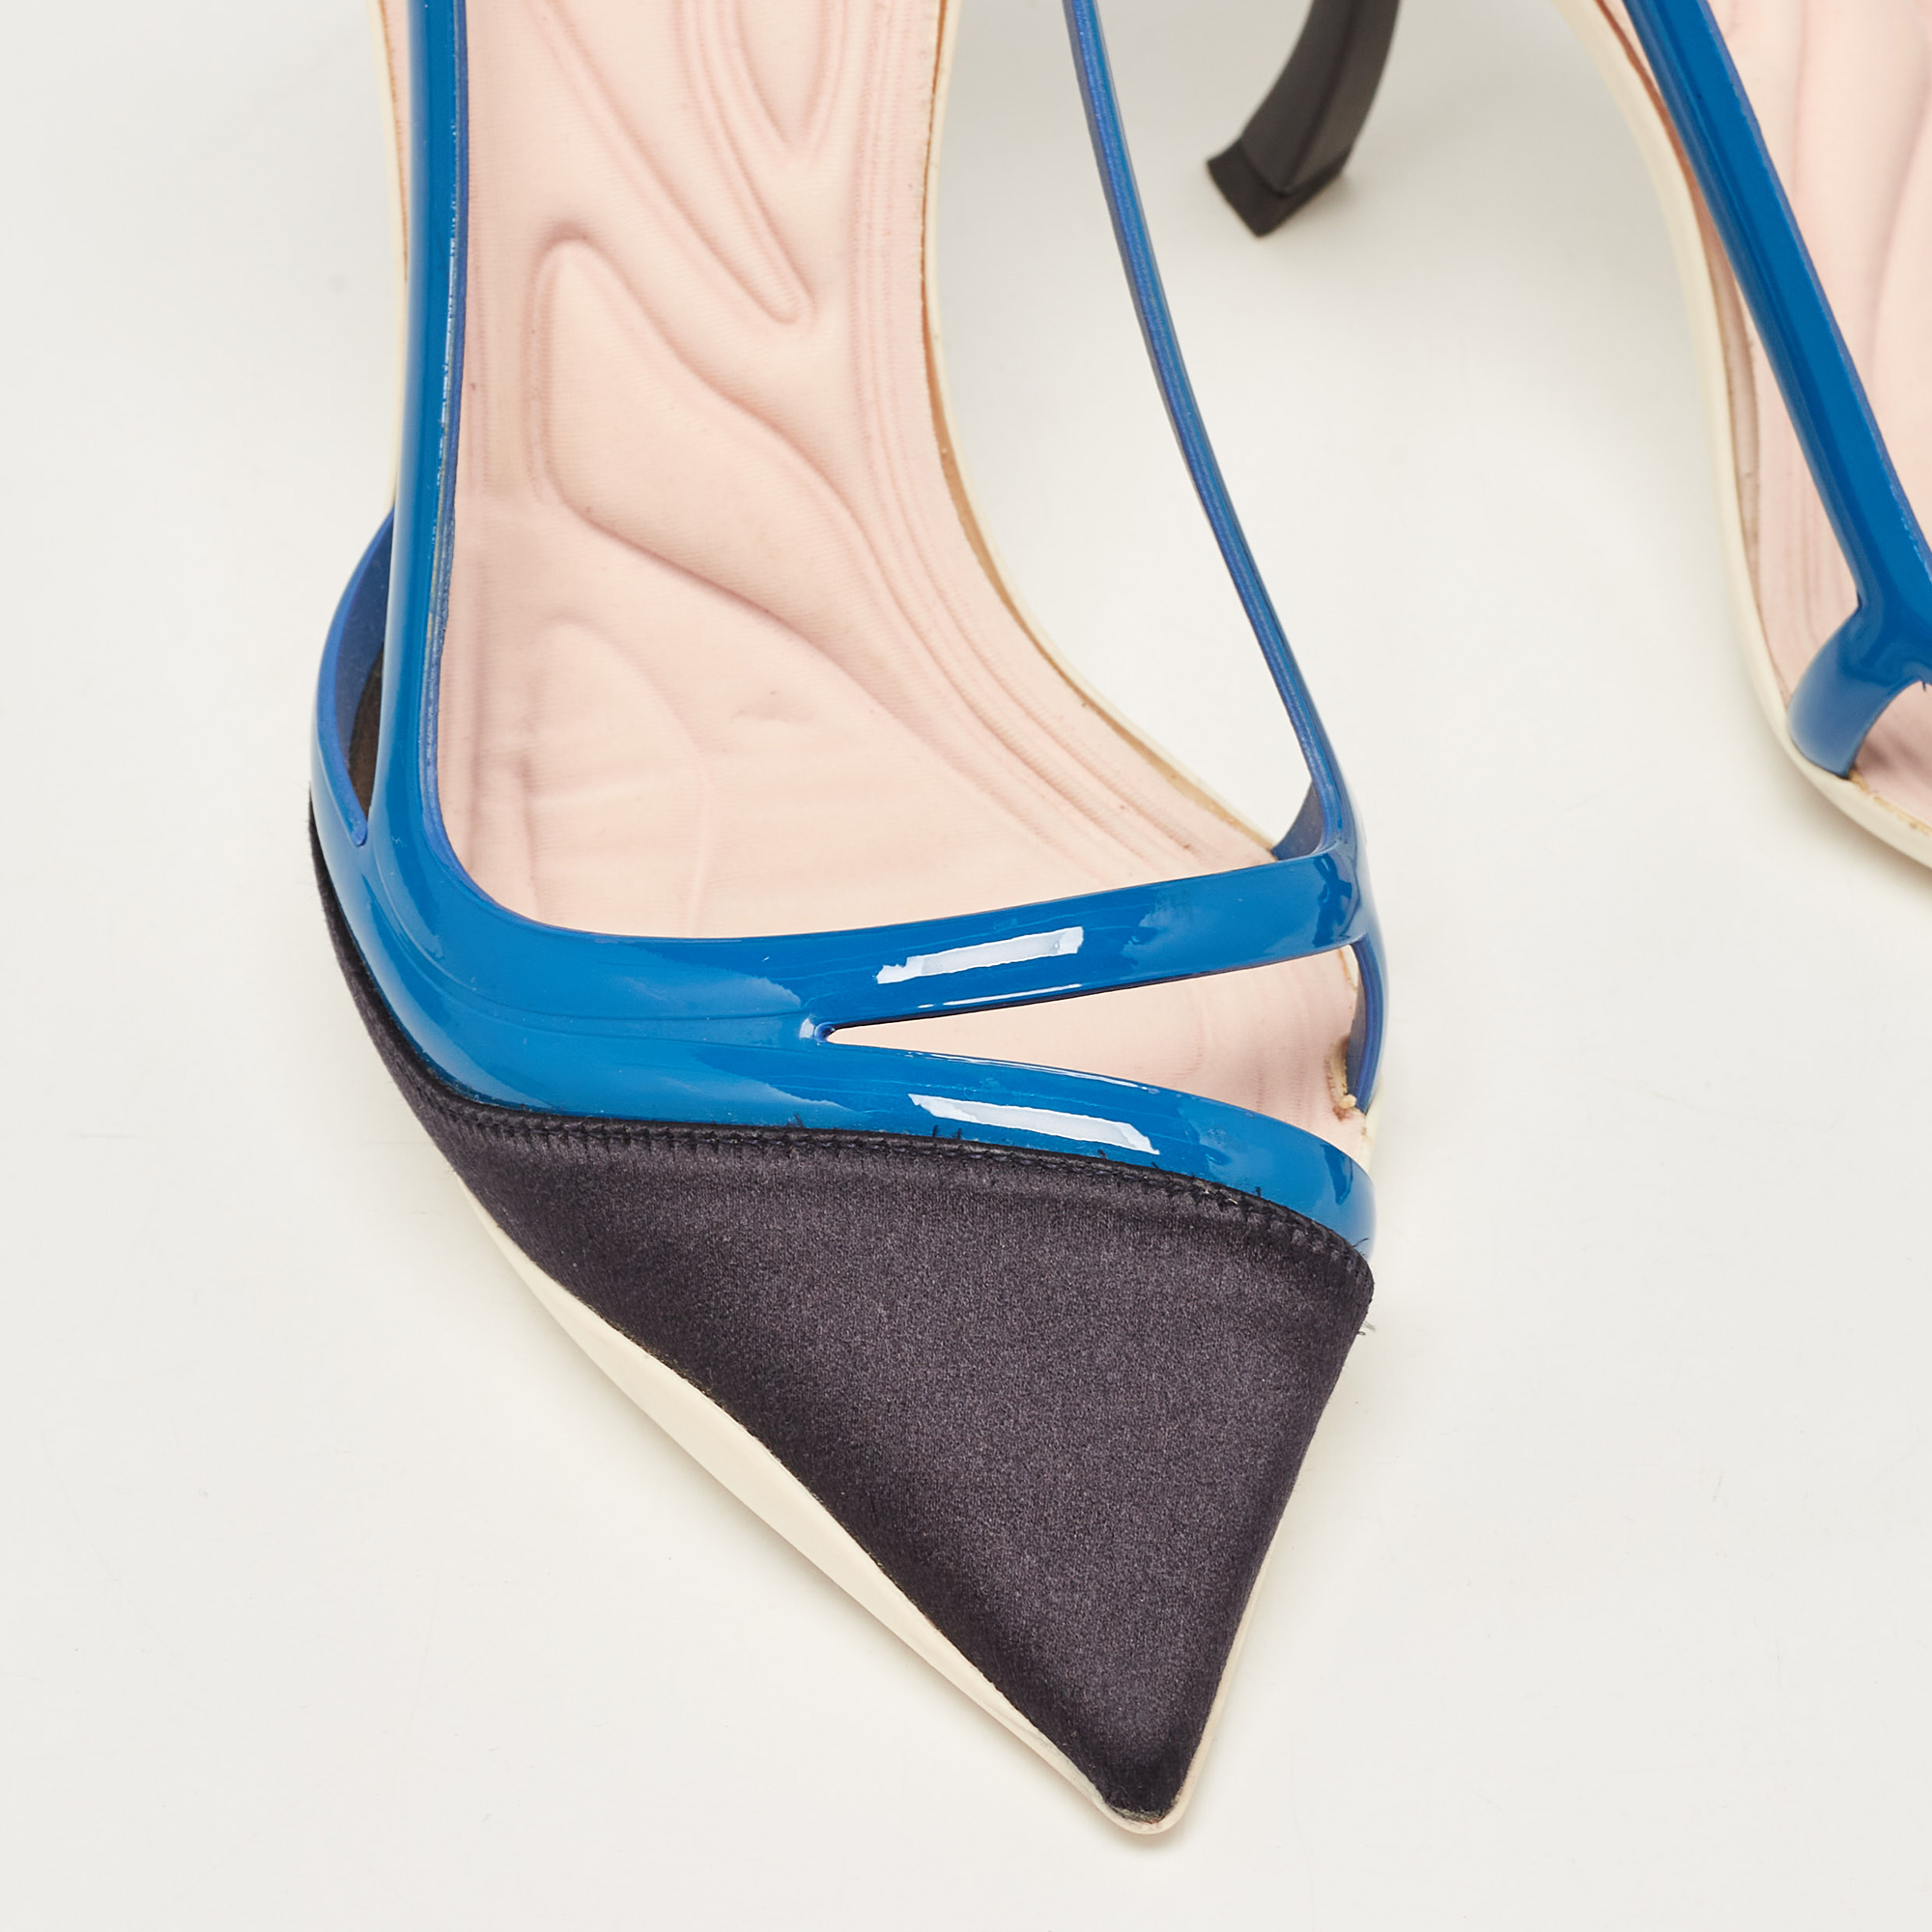 Dior Two Tone Blue Satin And Patent Leather Pointed Toe Curved Heel Pumps Size 38.5